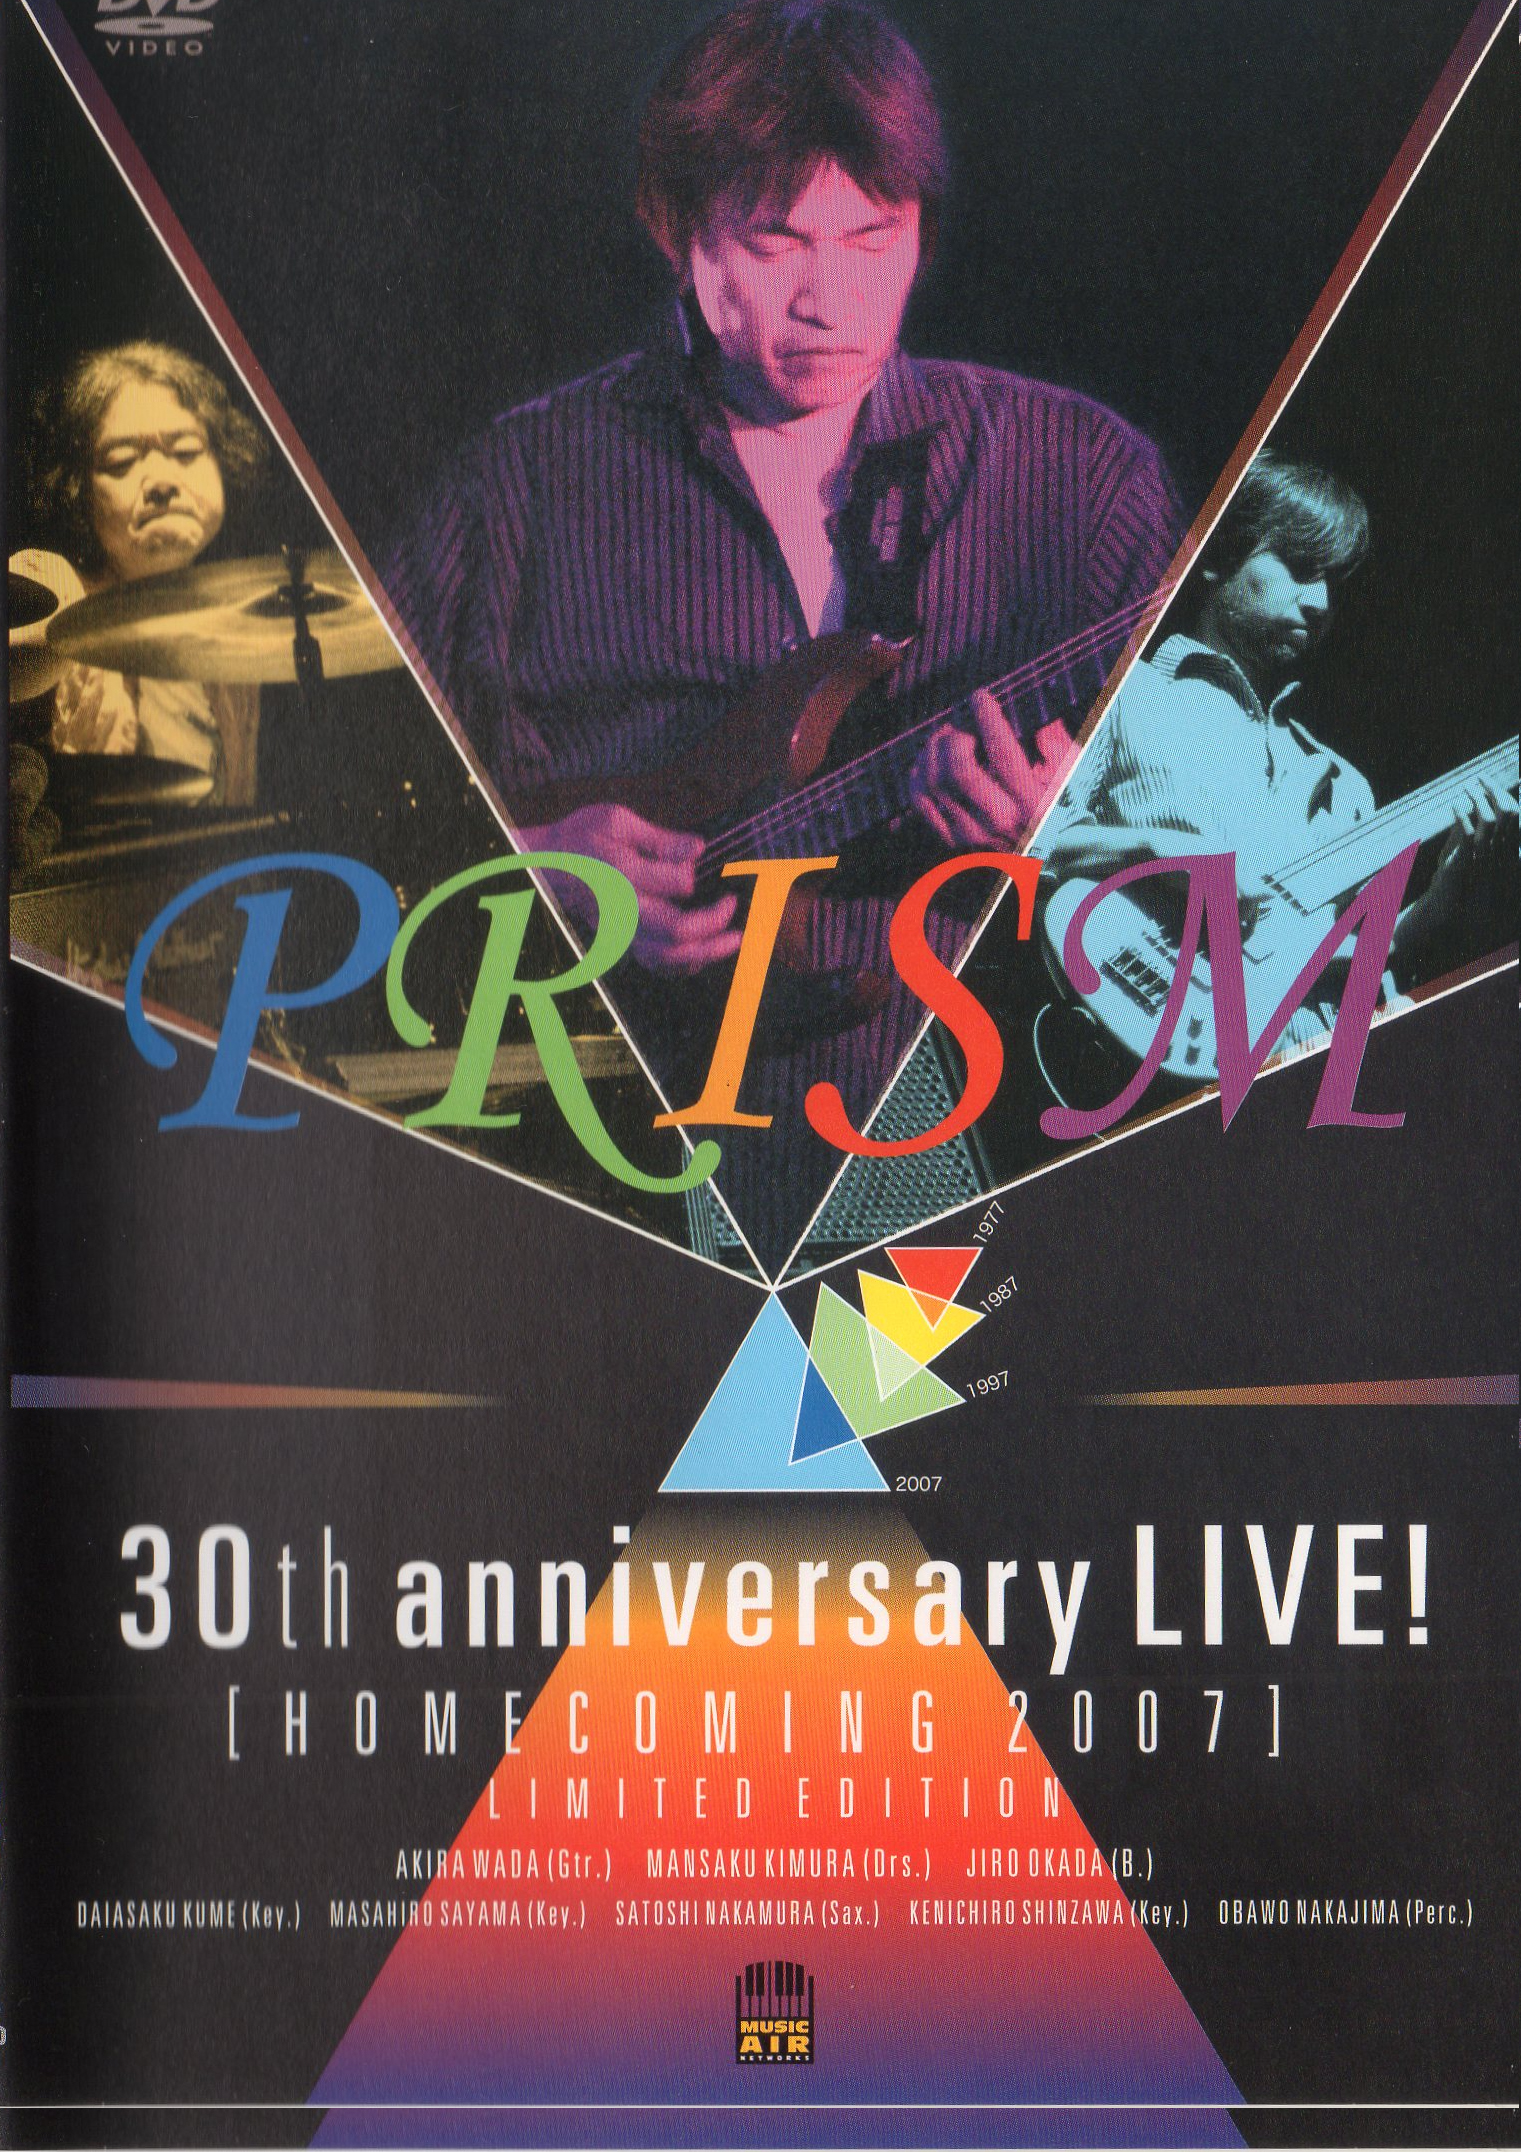 PRISM 30th anniversary LIVE ! [HOMECOMING 2007]